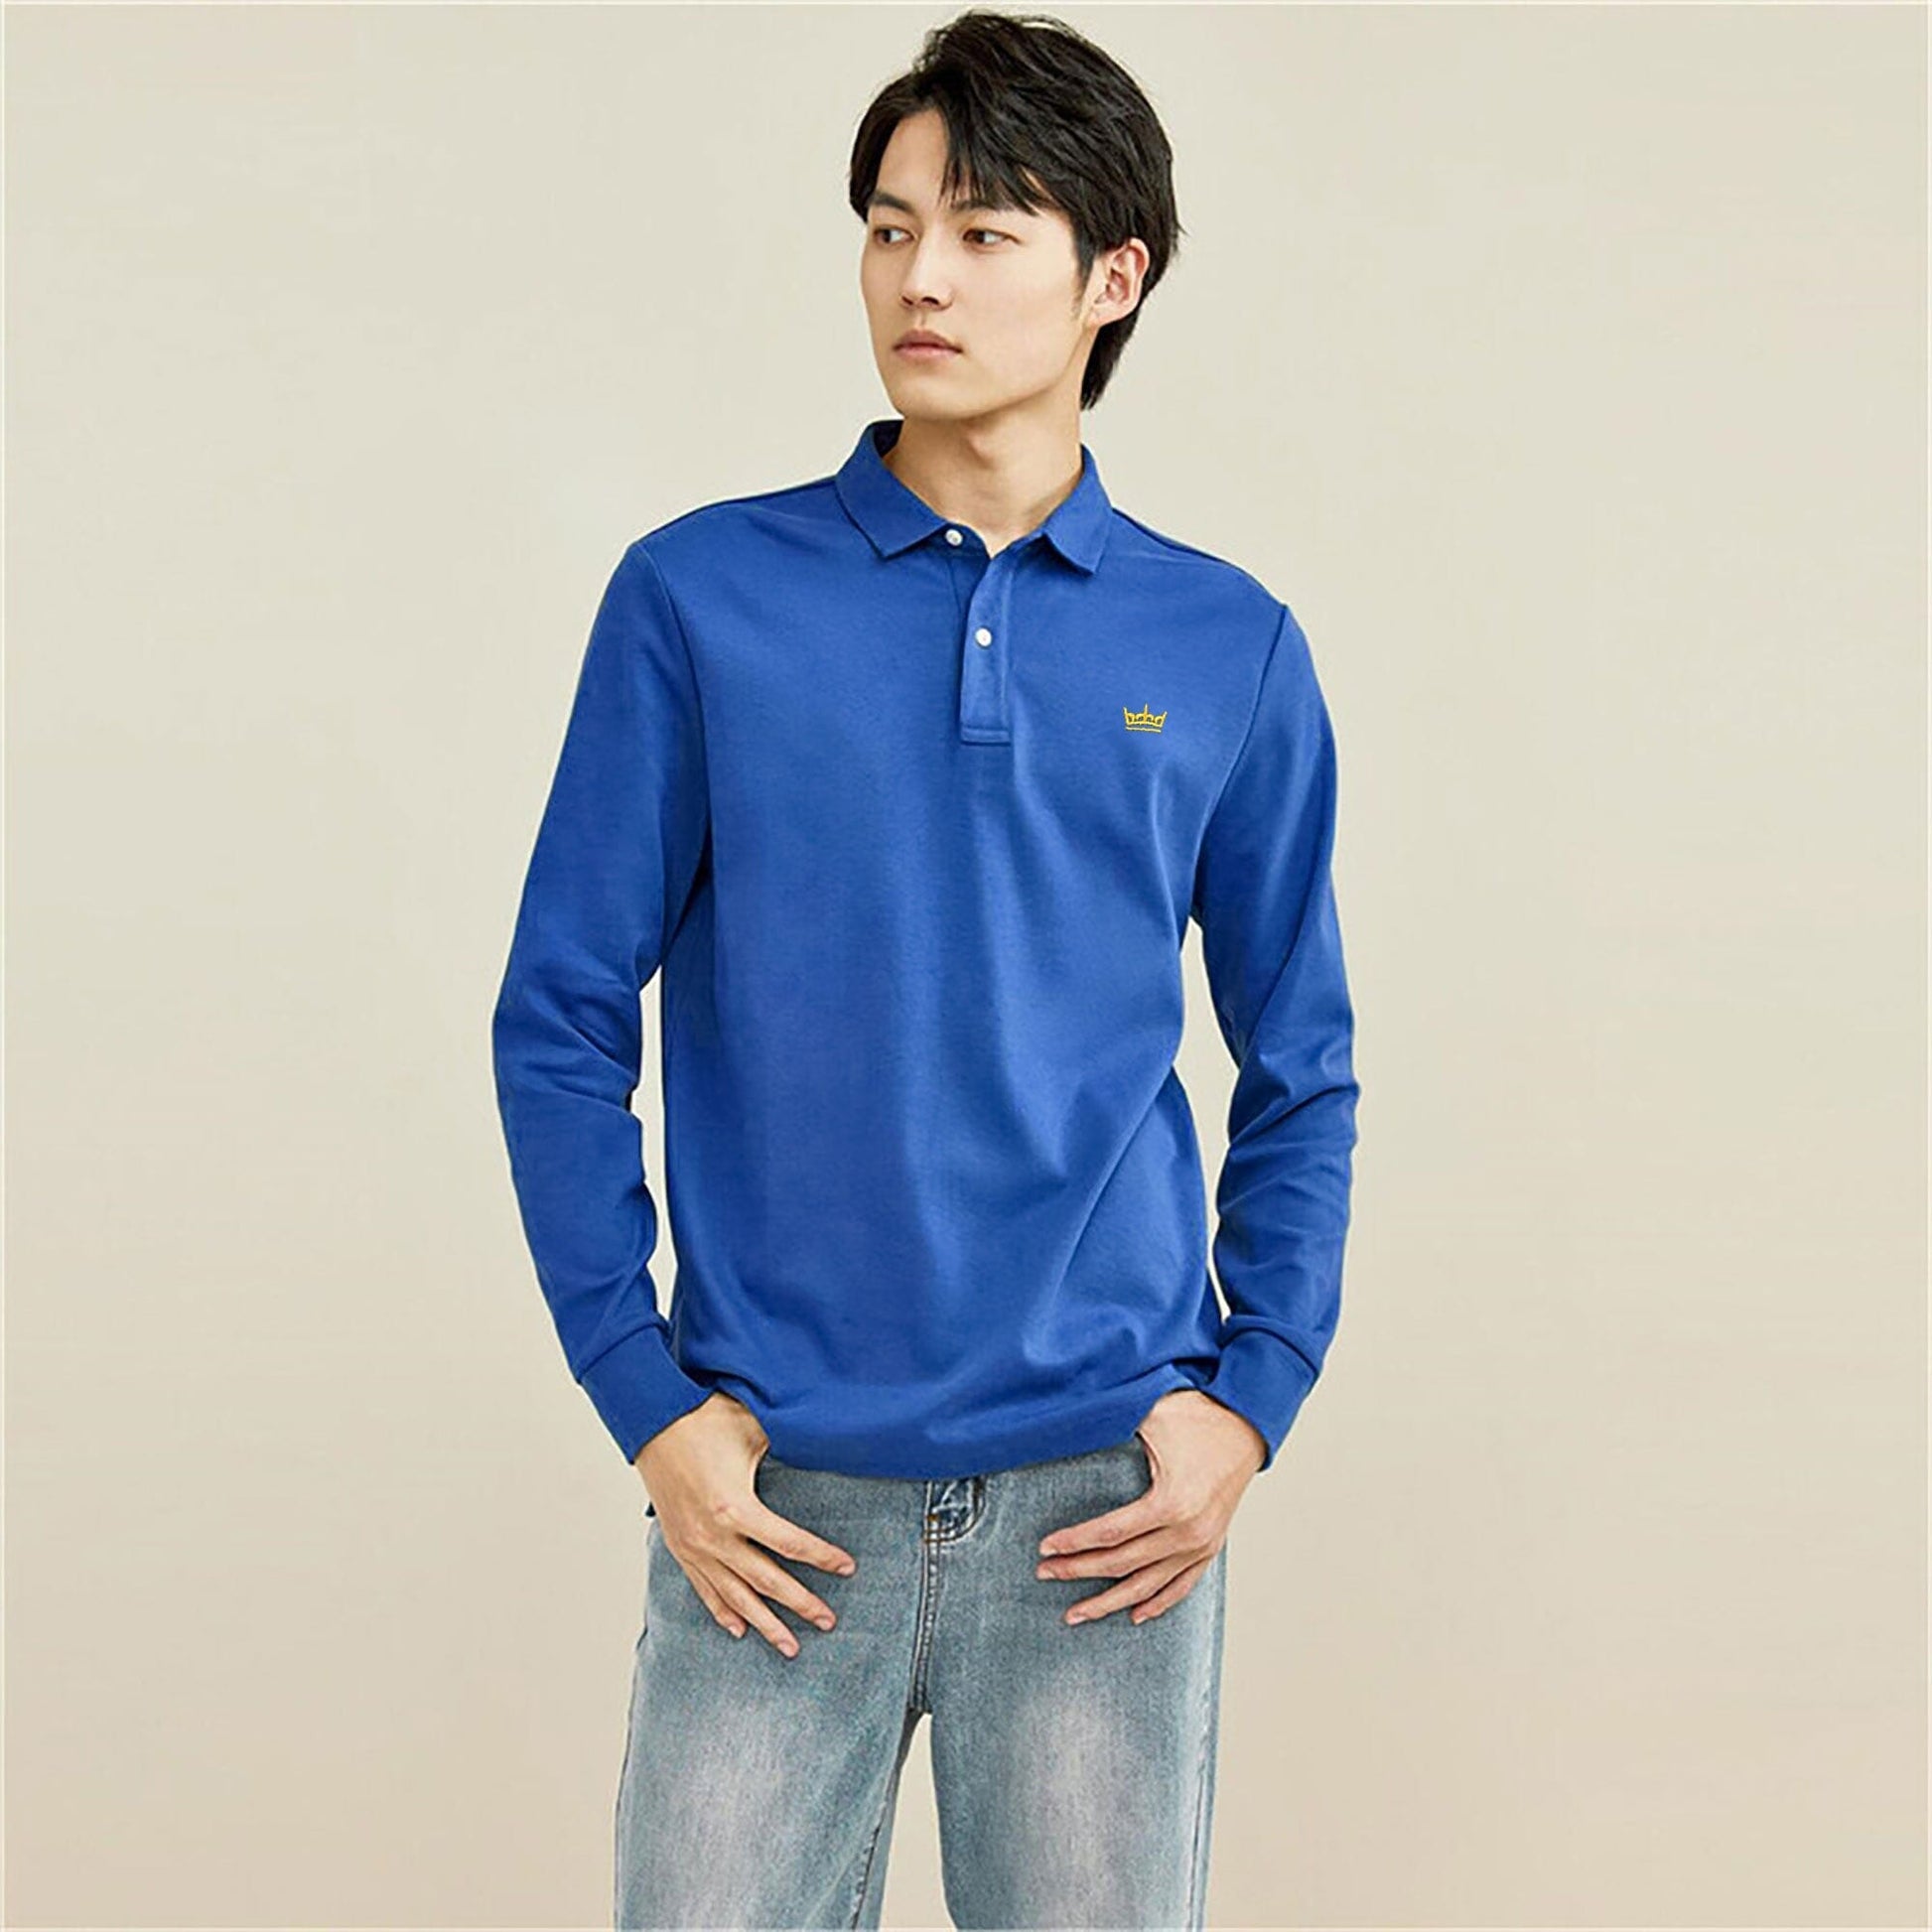 Industrialize Men's Crown Embroidered Minor Fault Long Sleeve Polo Shirt Men's Polo Shirt IST Royal 2XS 